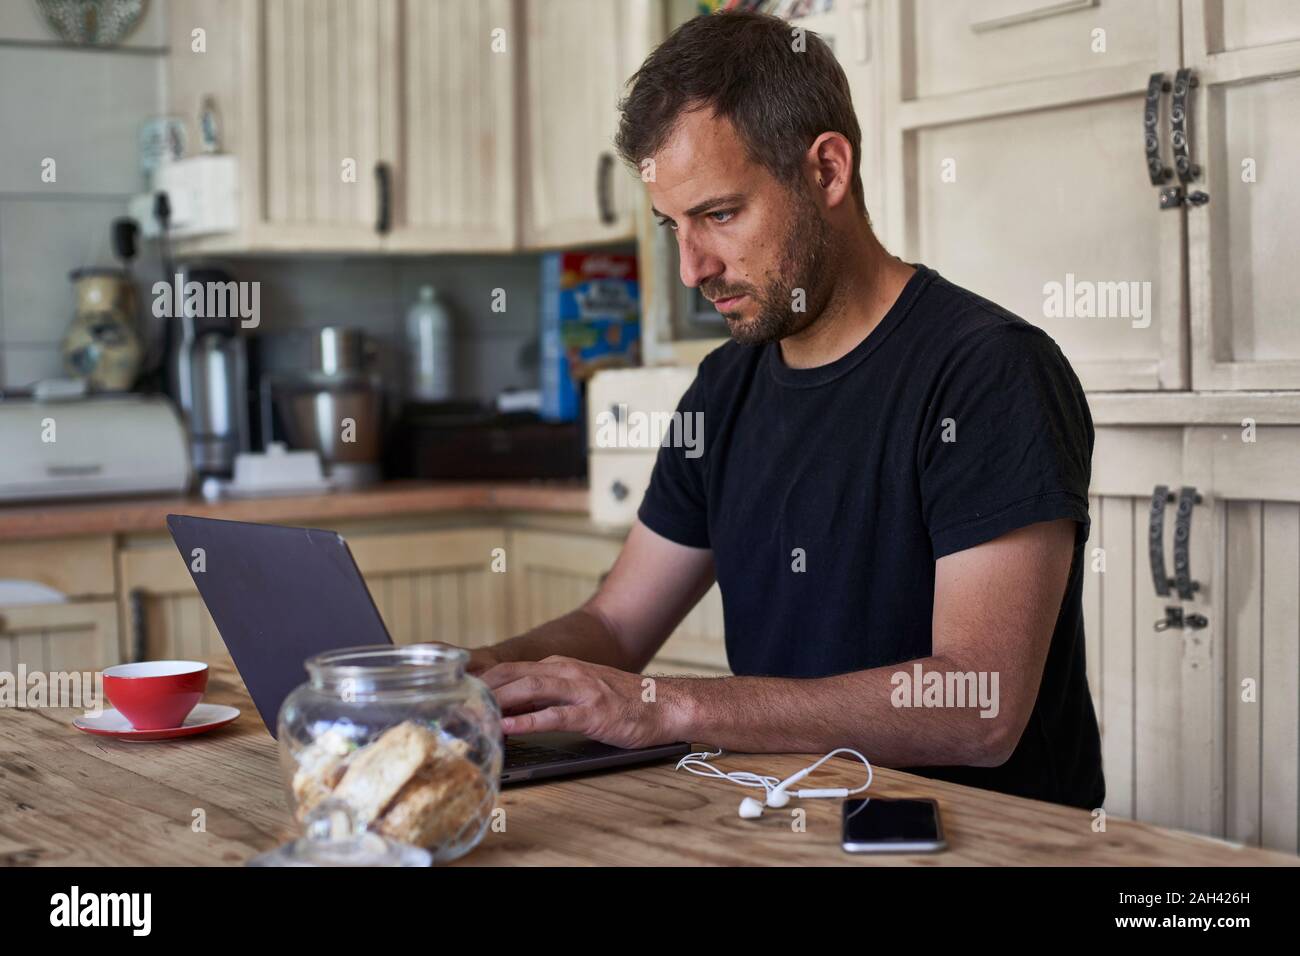 Man working from home, sitting at kitchen table, using laptop and smartphone Stock Photo